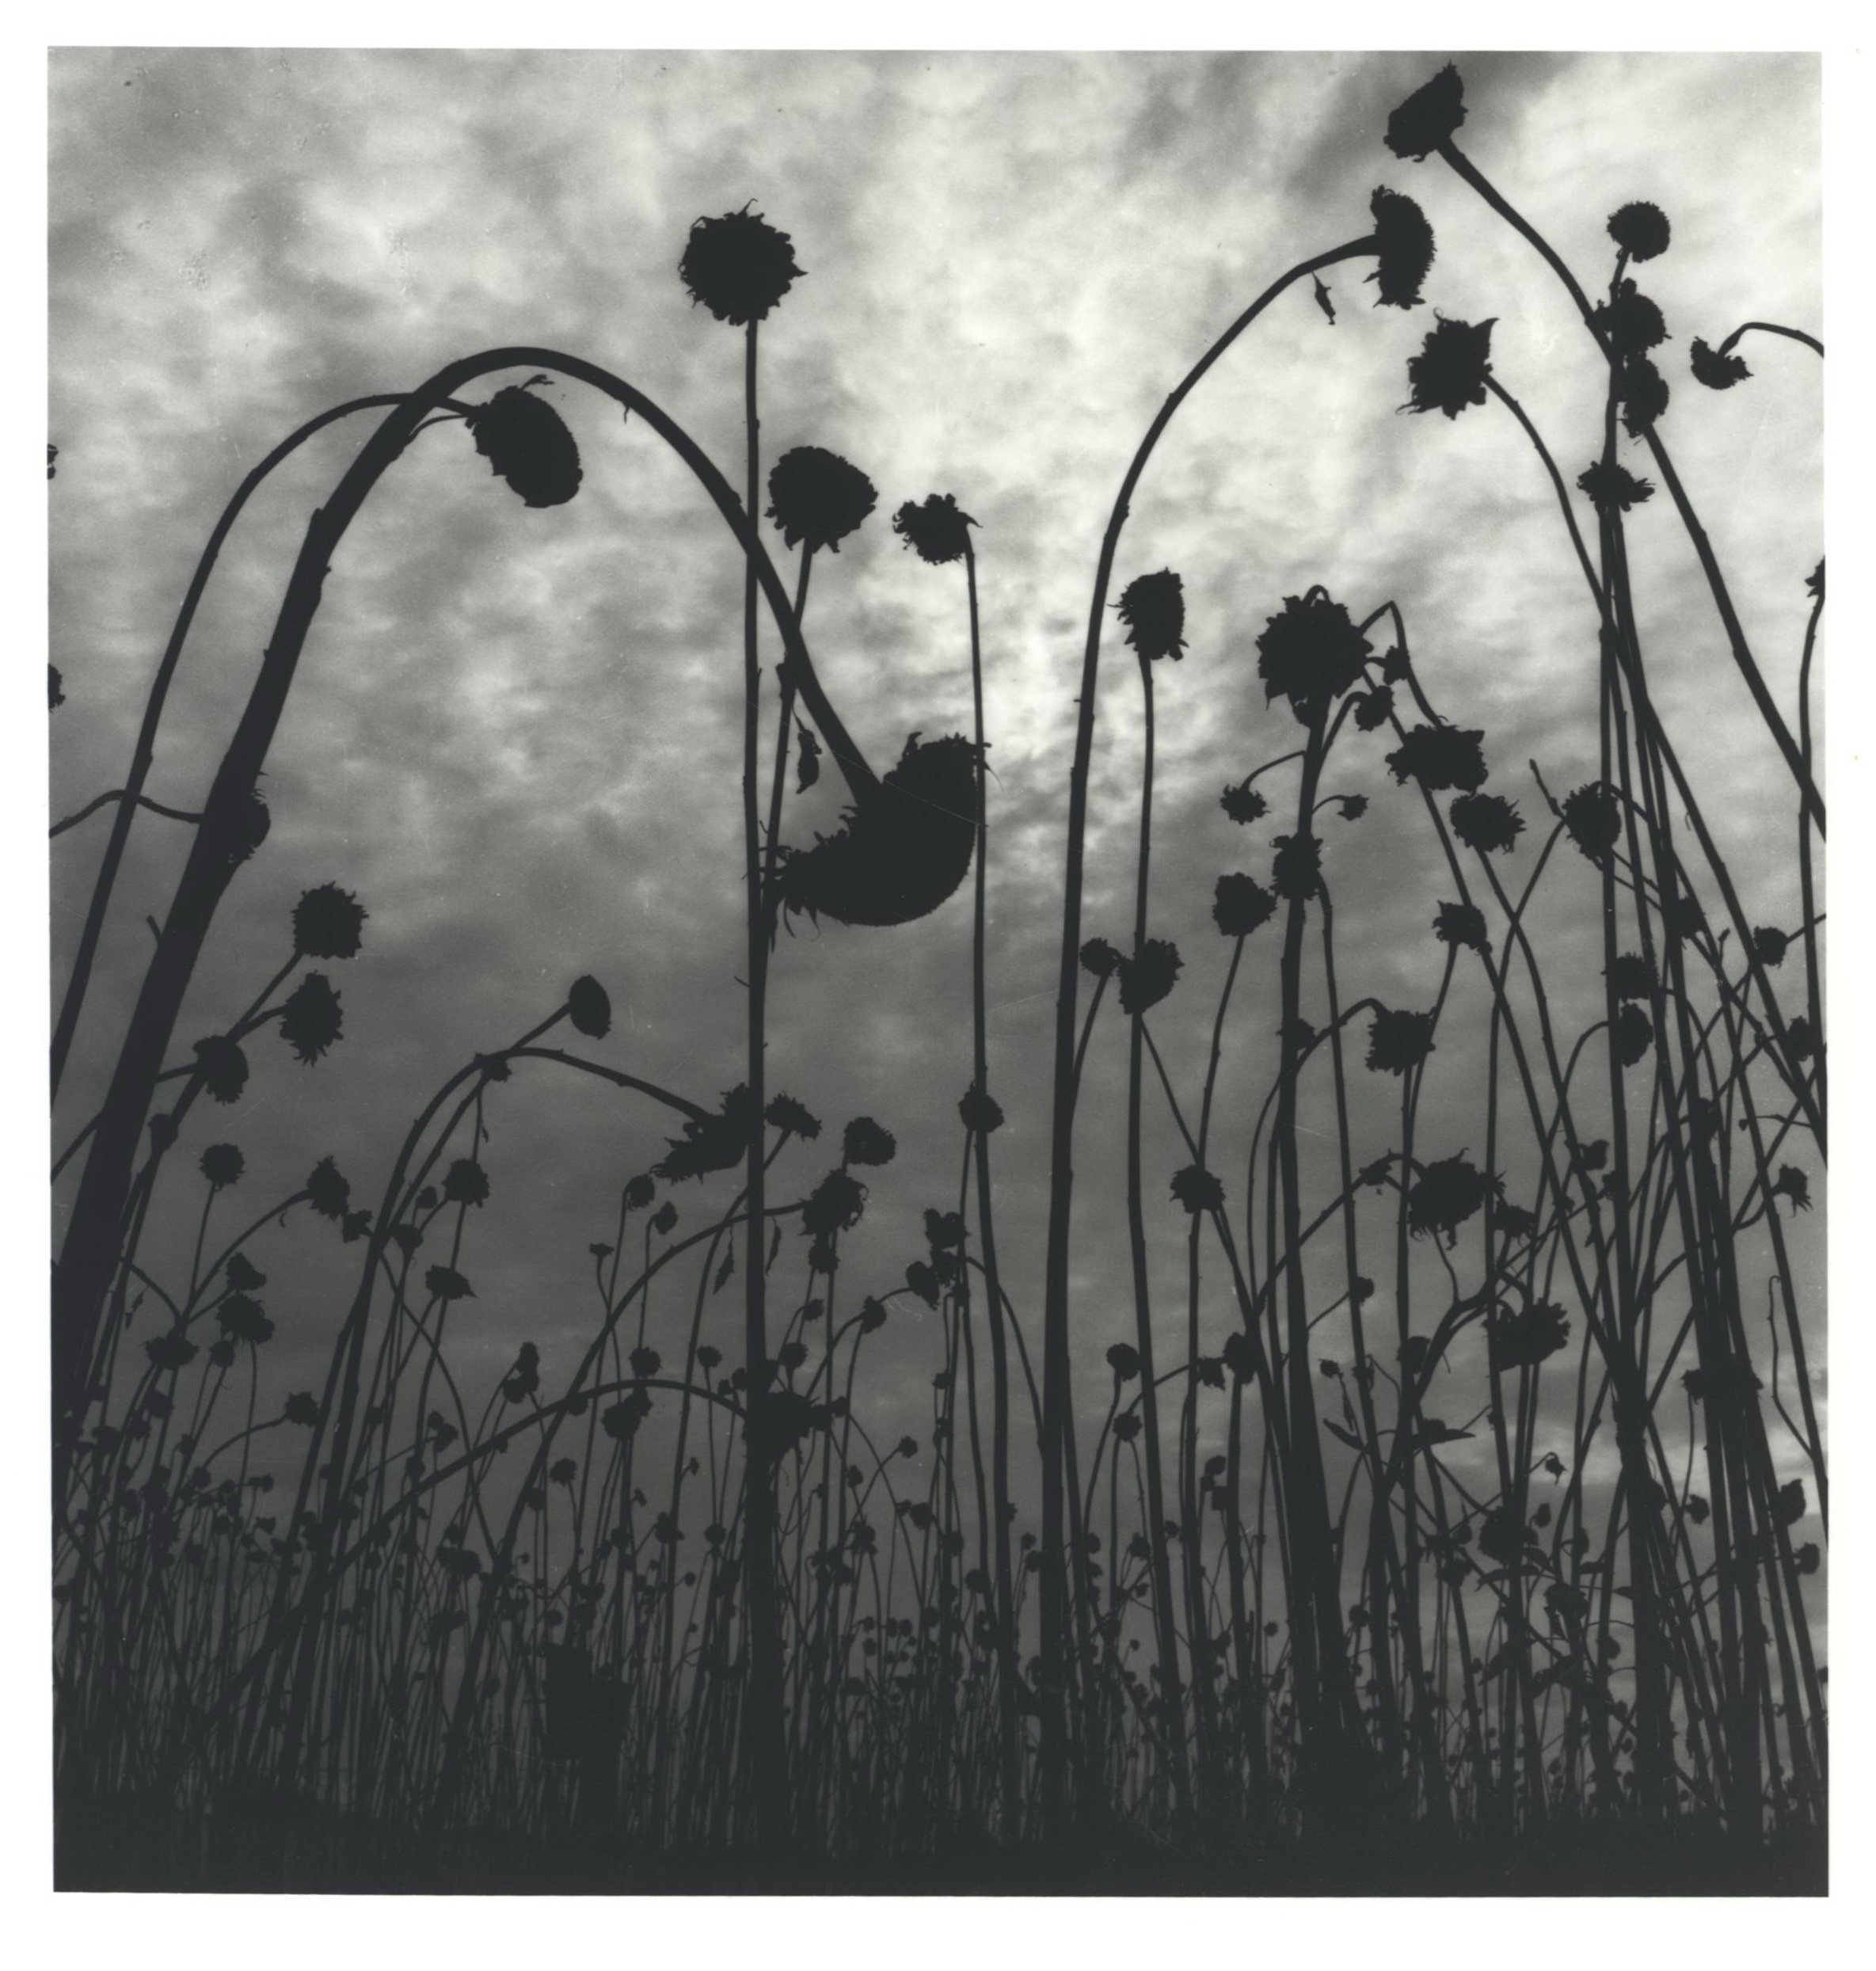 Dead Sunflowers by Olive Cotton, 1984